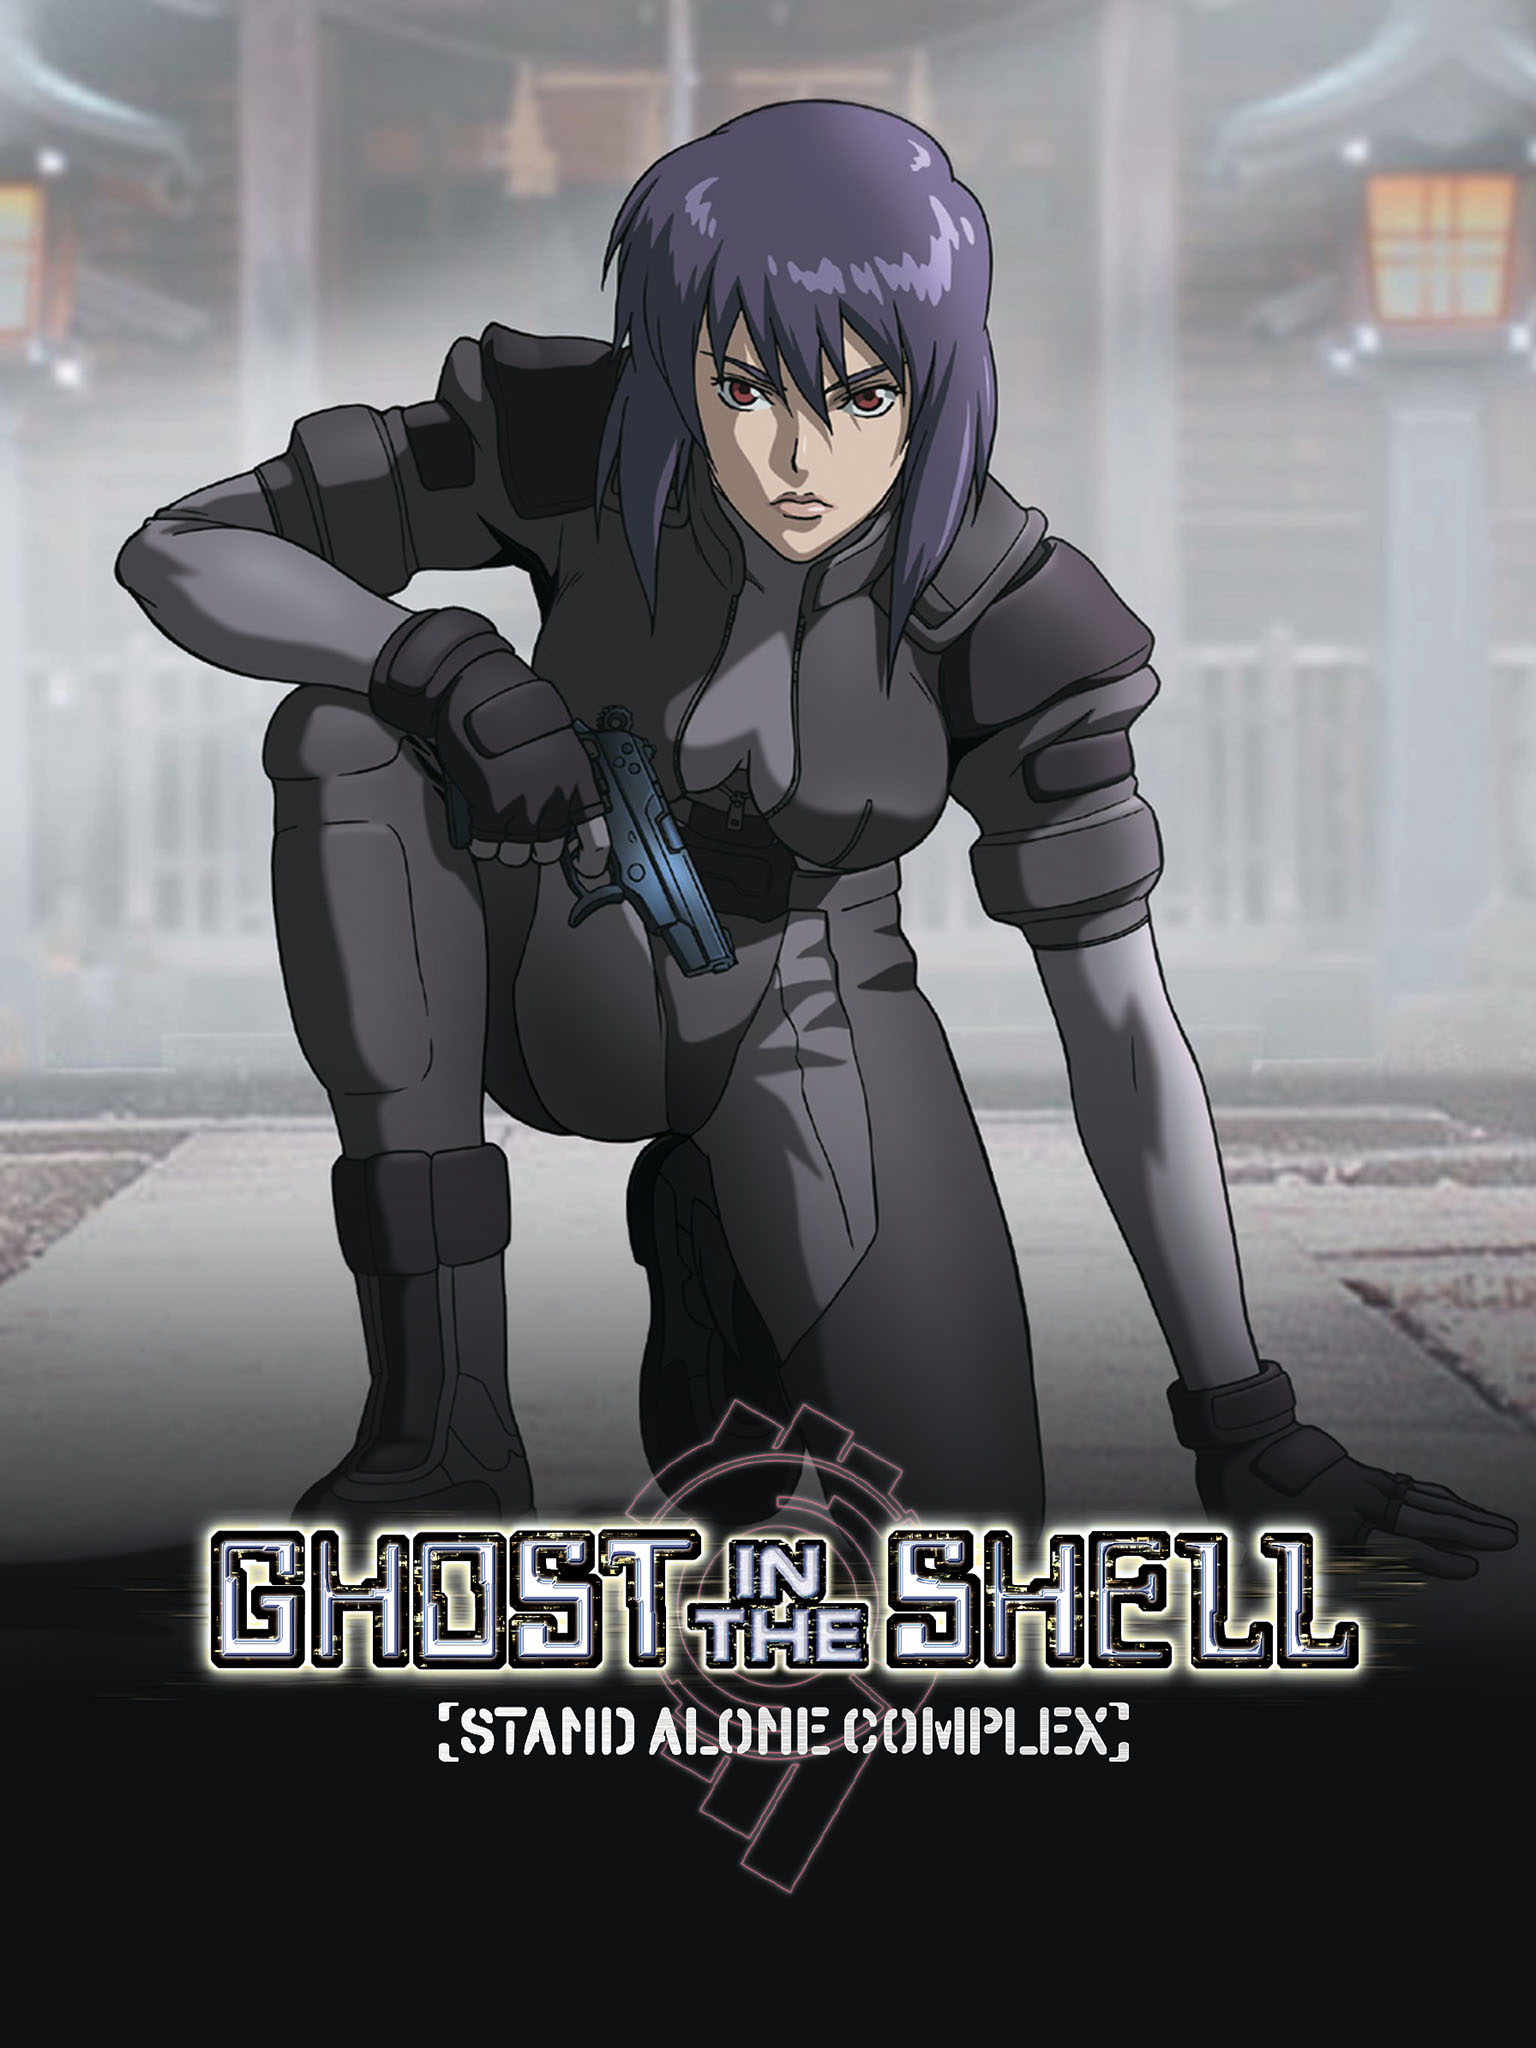 Xem Phim Vỏ bọc ma: Stand Alone Complex (Phần 1) (Ghost in the Shell: Stand Alone Complex (Season 1))